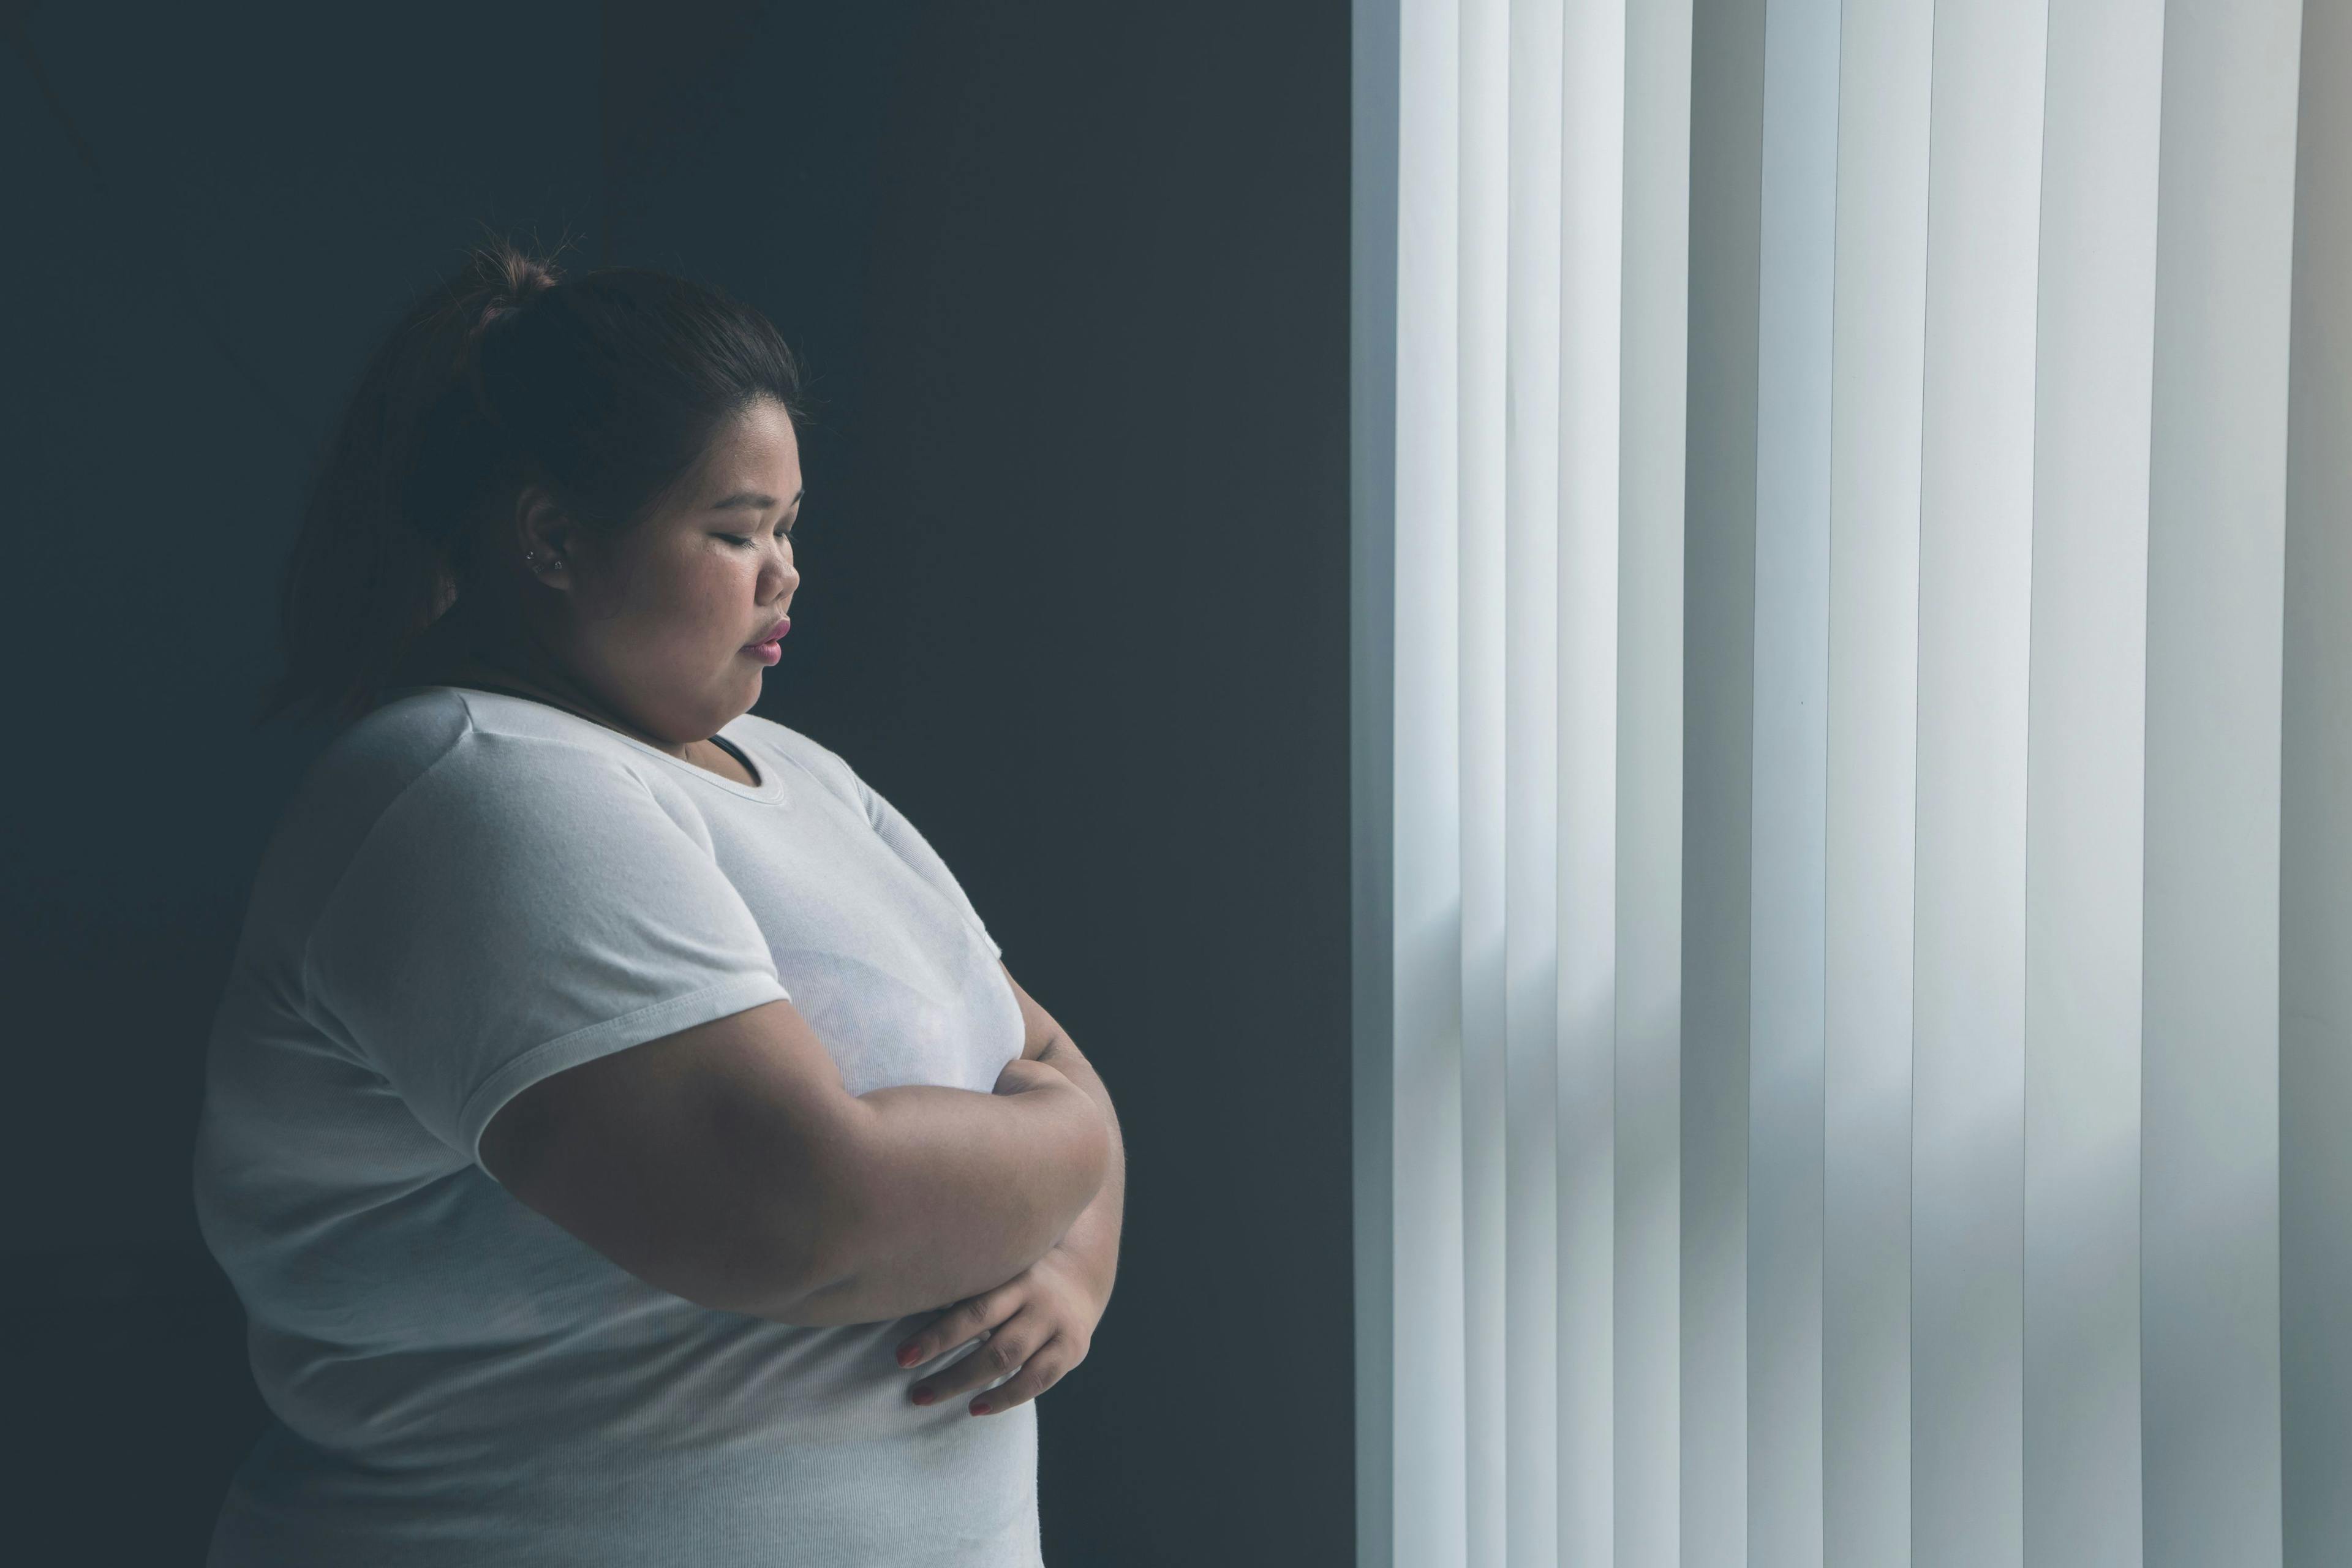 Metabolic mediators of anxious depression? Researchers investigated metabolic correlates of overweight/obesity in patients with MDD.